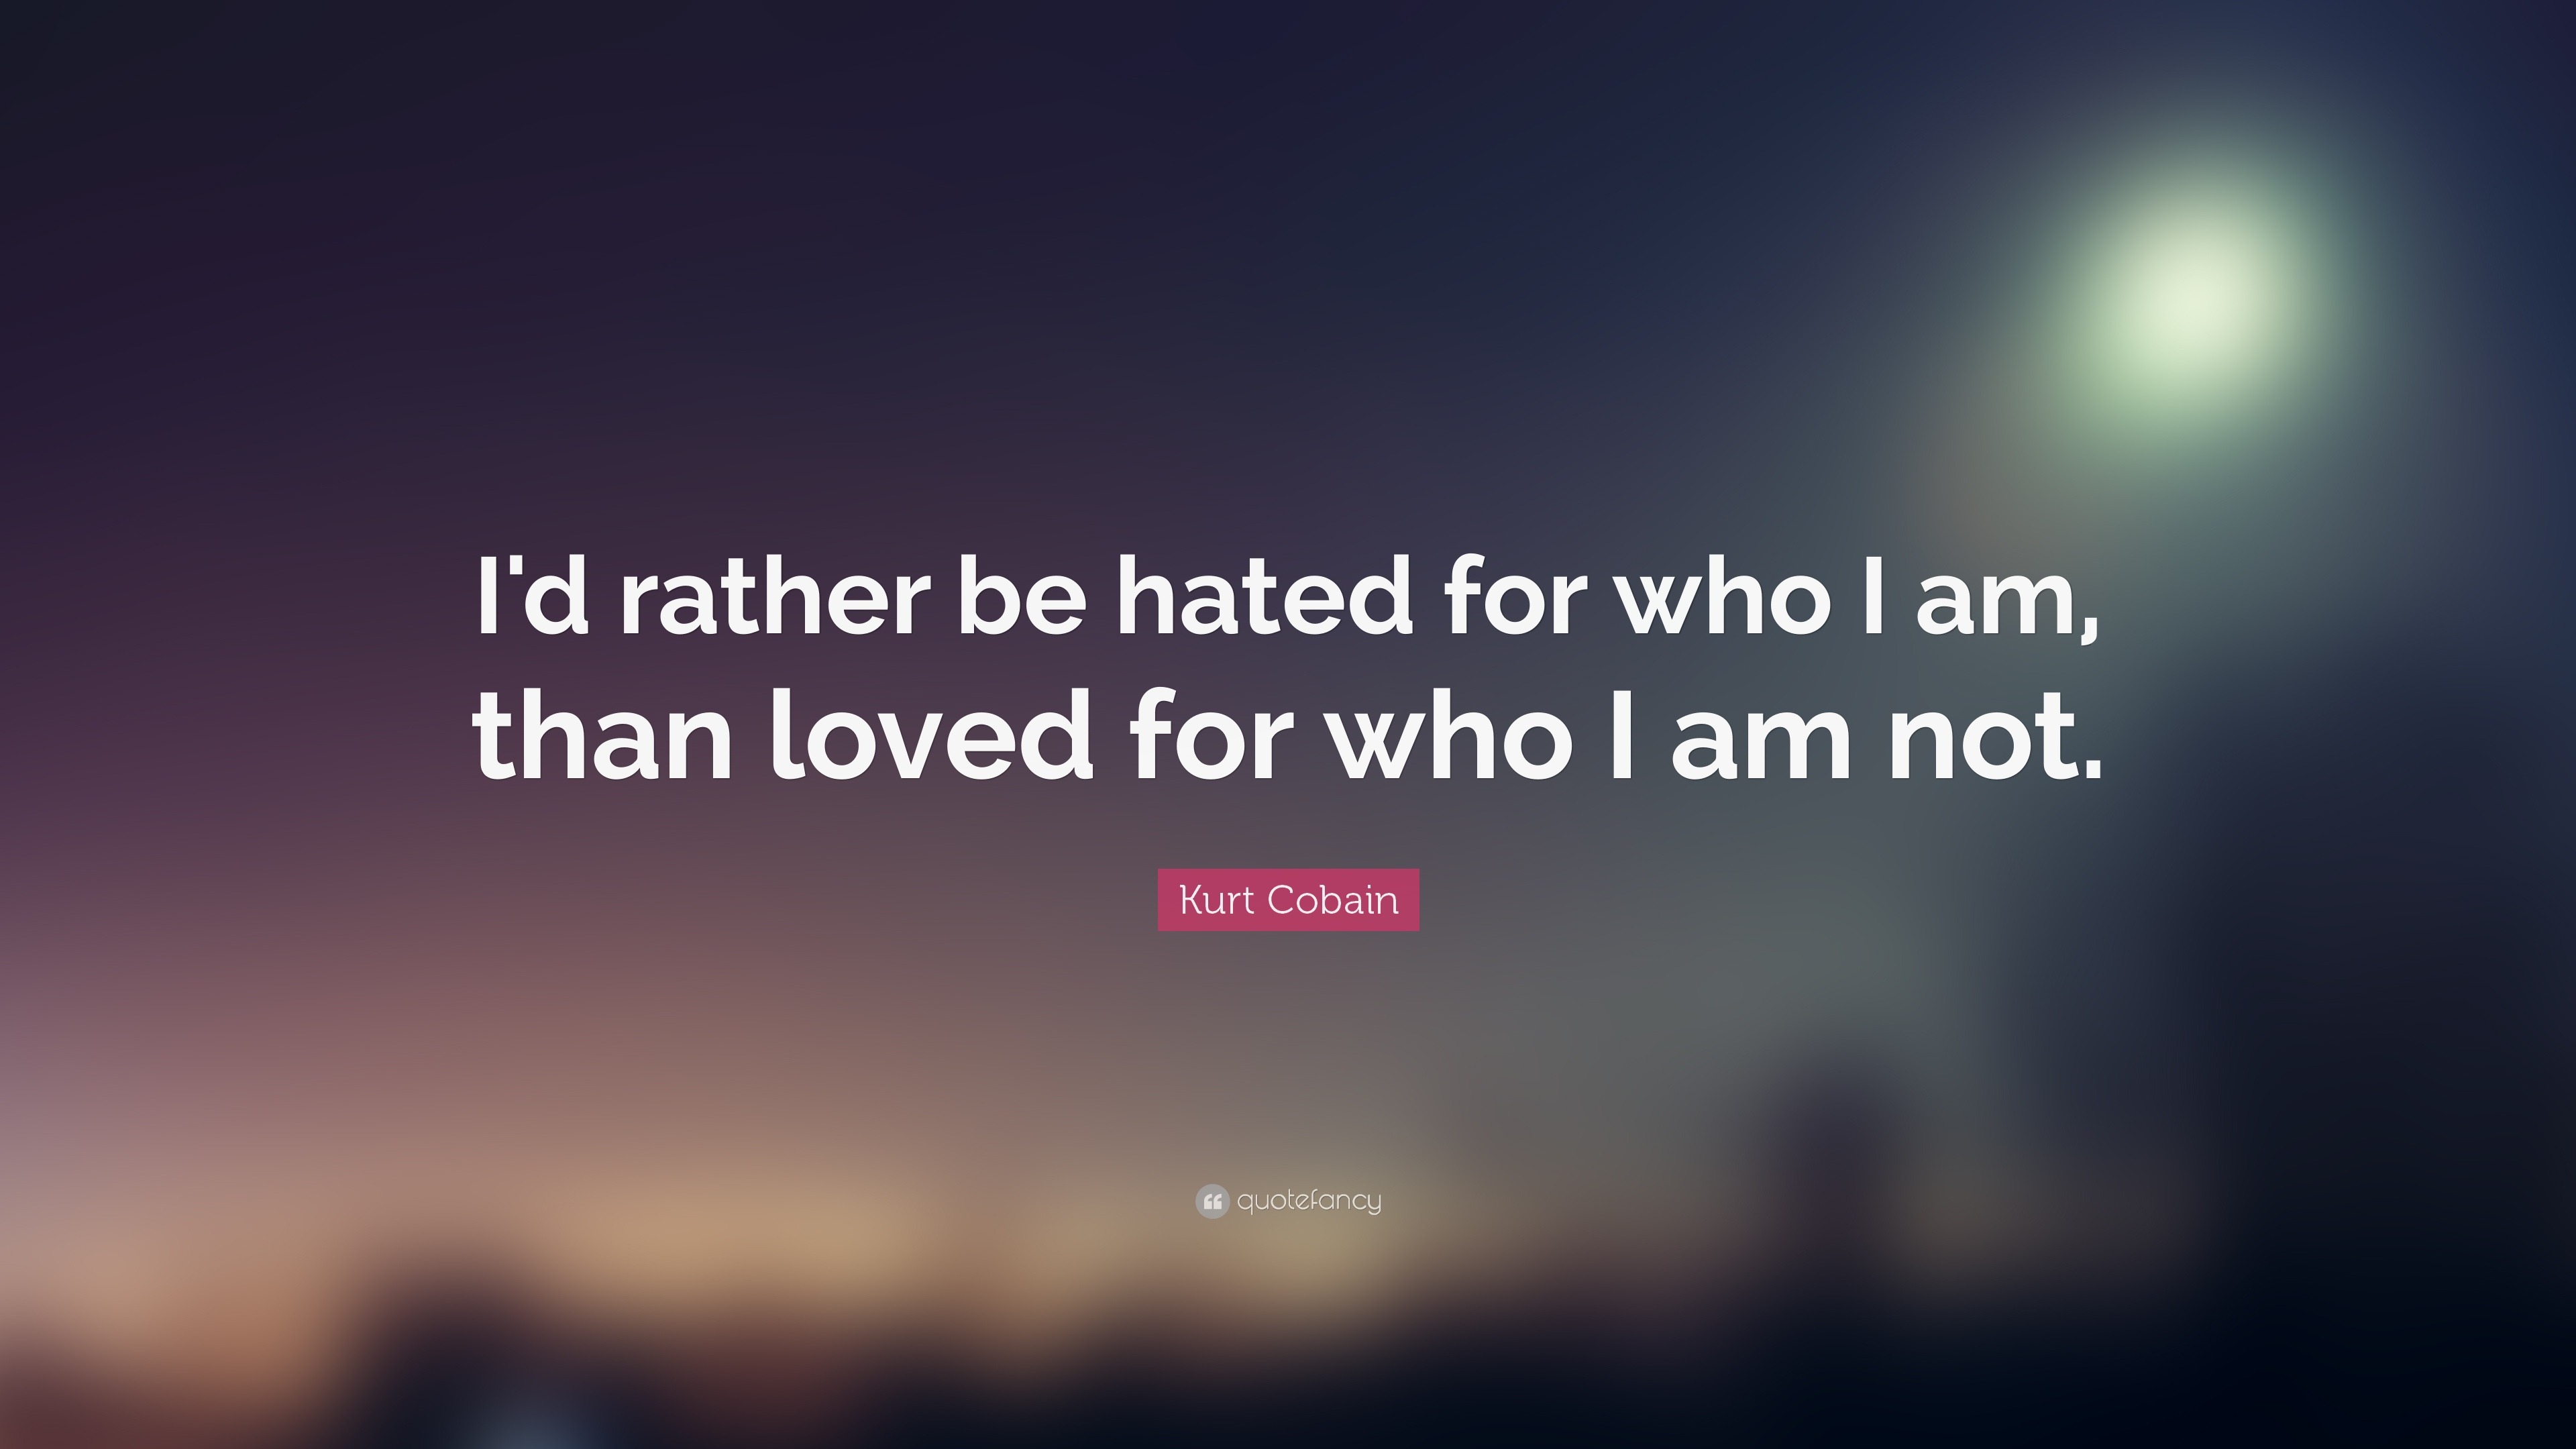 Kurt Cobain Quote: "I'd rather be hated for who I am, than ...